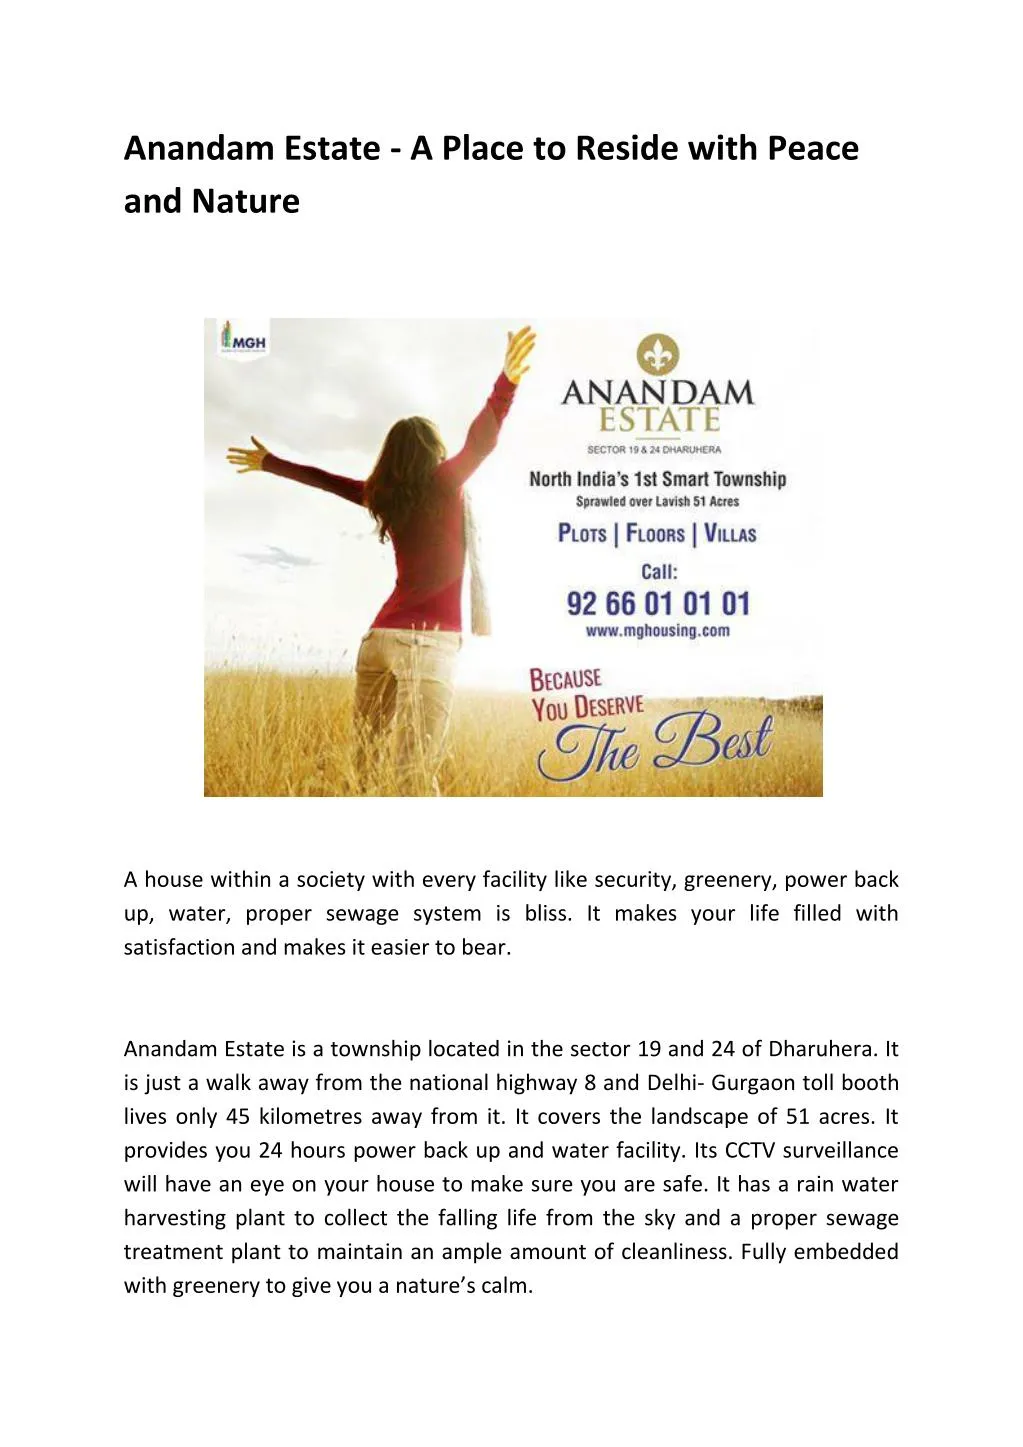 anandam estate a place to reside with peace